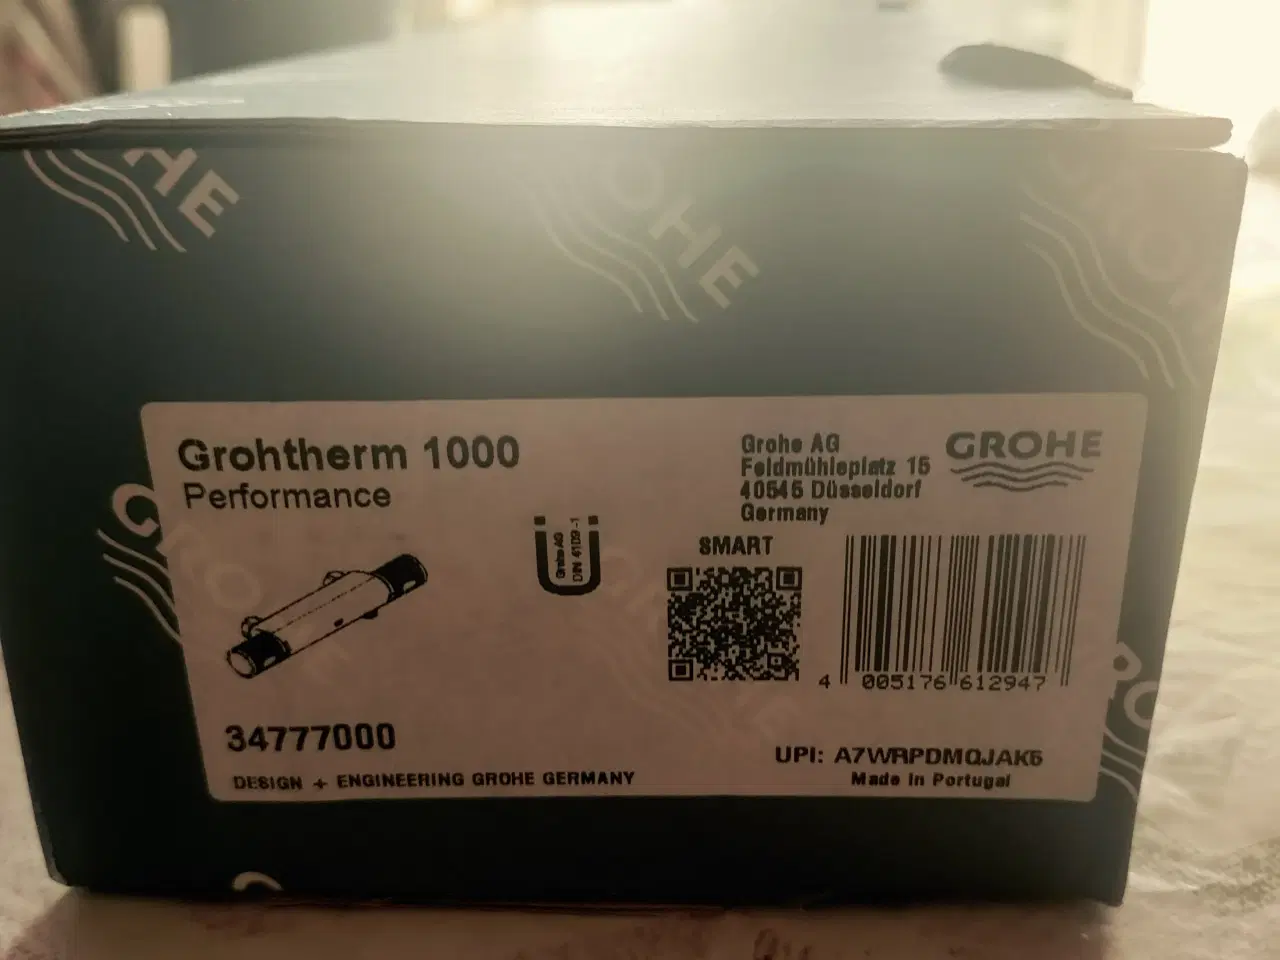 Billede 2 - Grohe grohtherm performance 1000